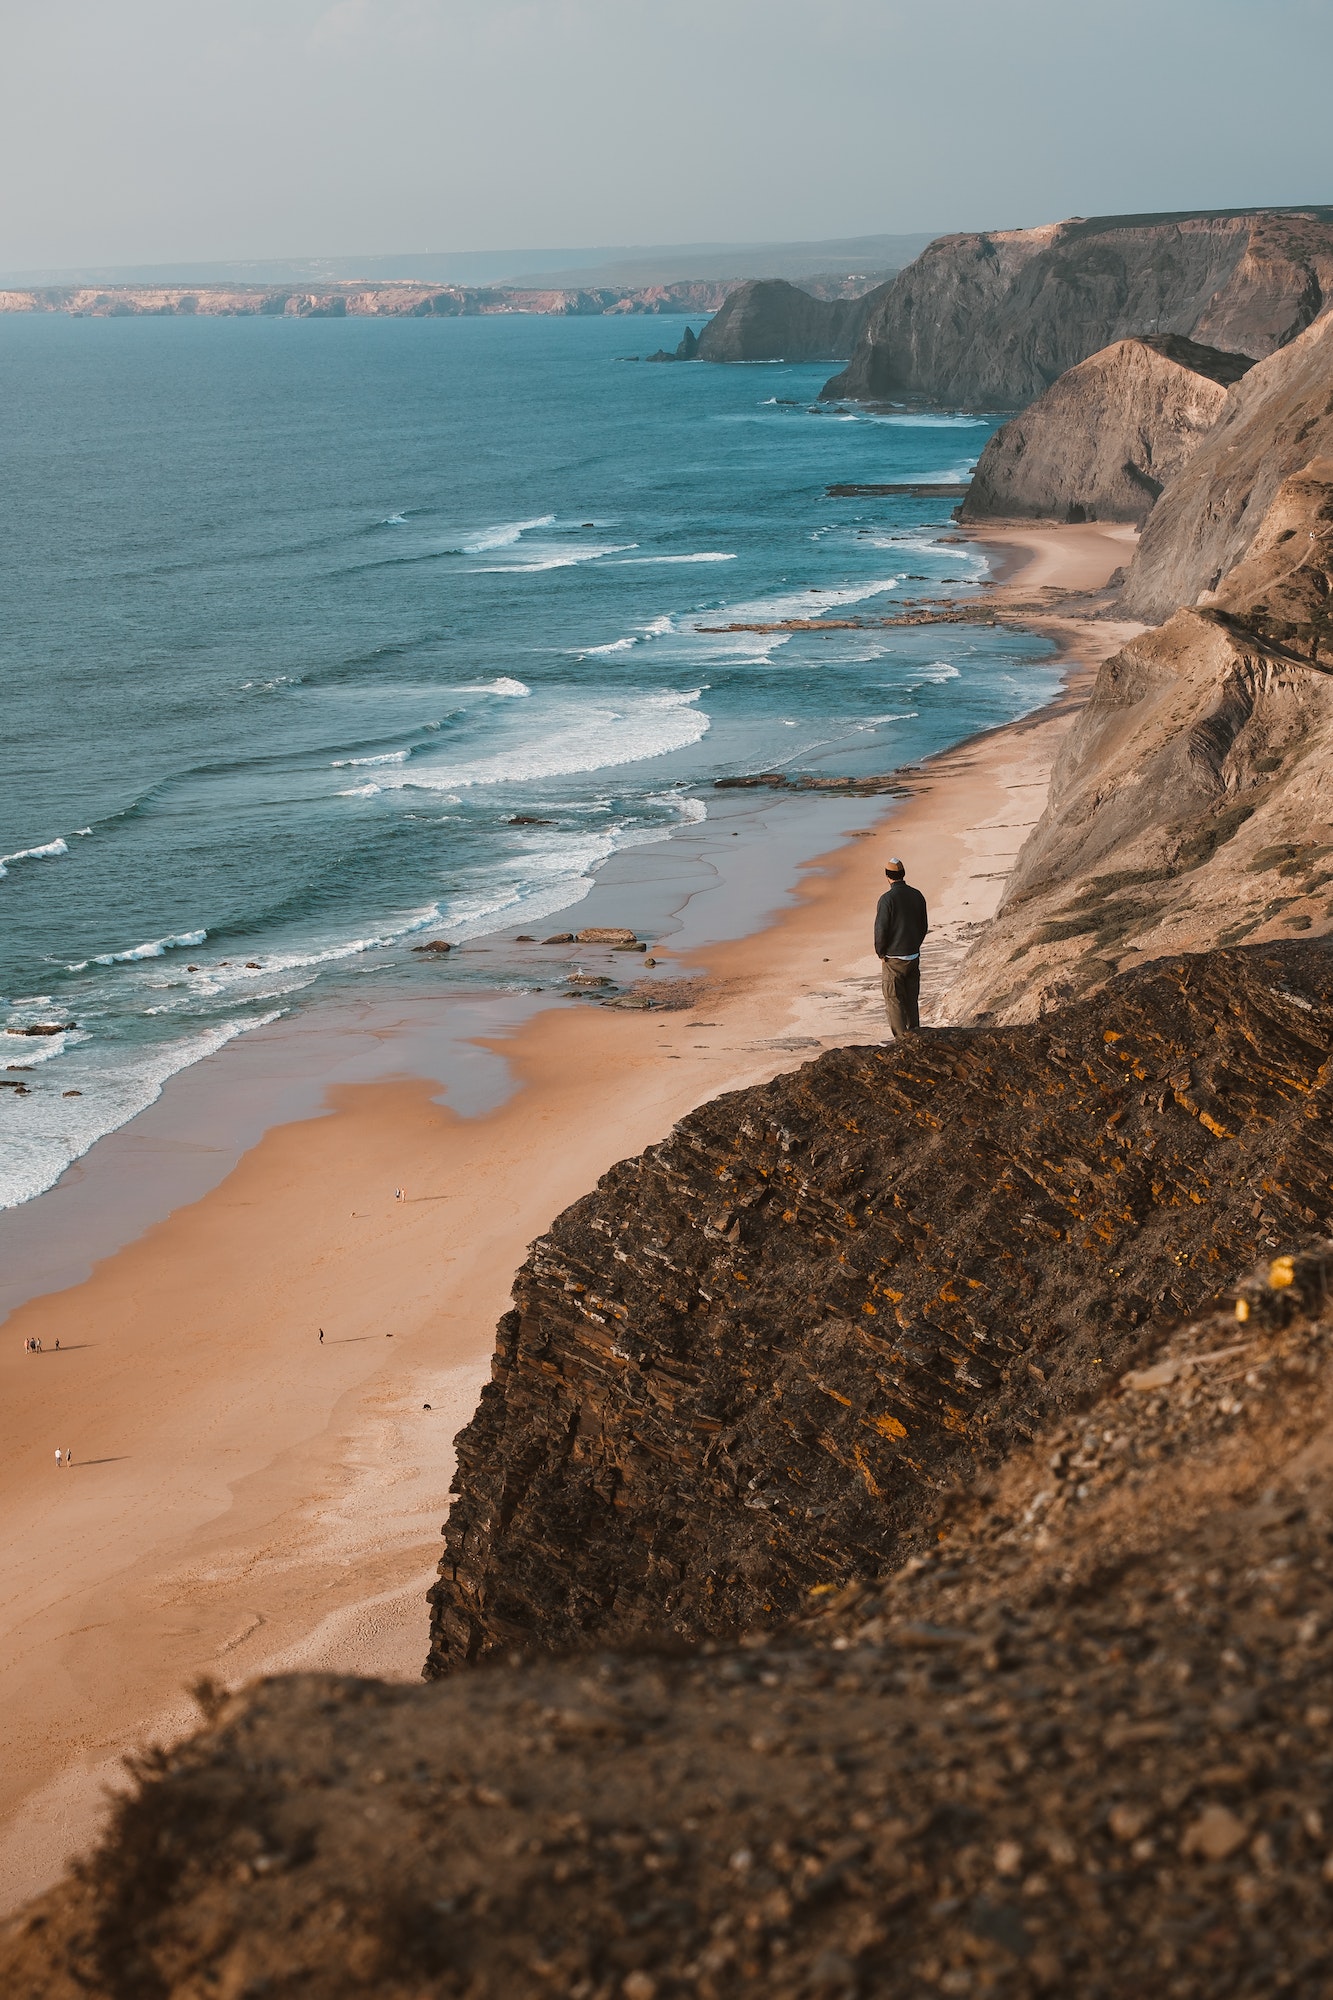 Vertical shot of a person on a cliff looking at the beautiful ocean in Algarve, Portugal